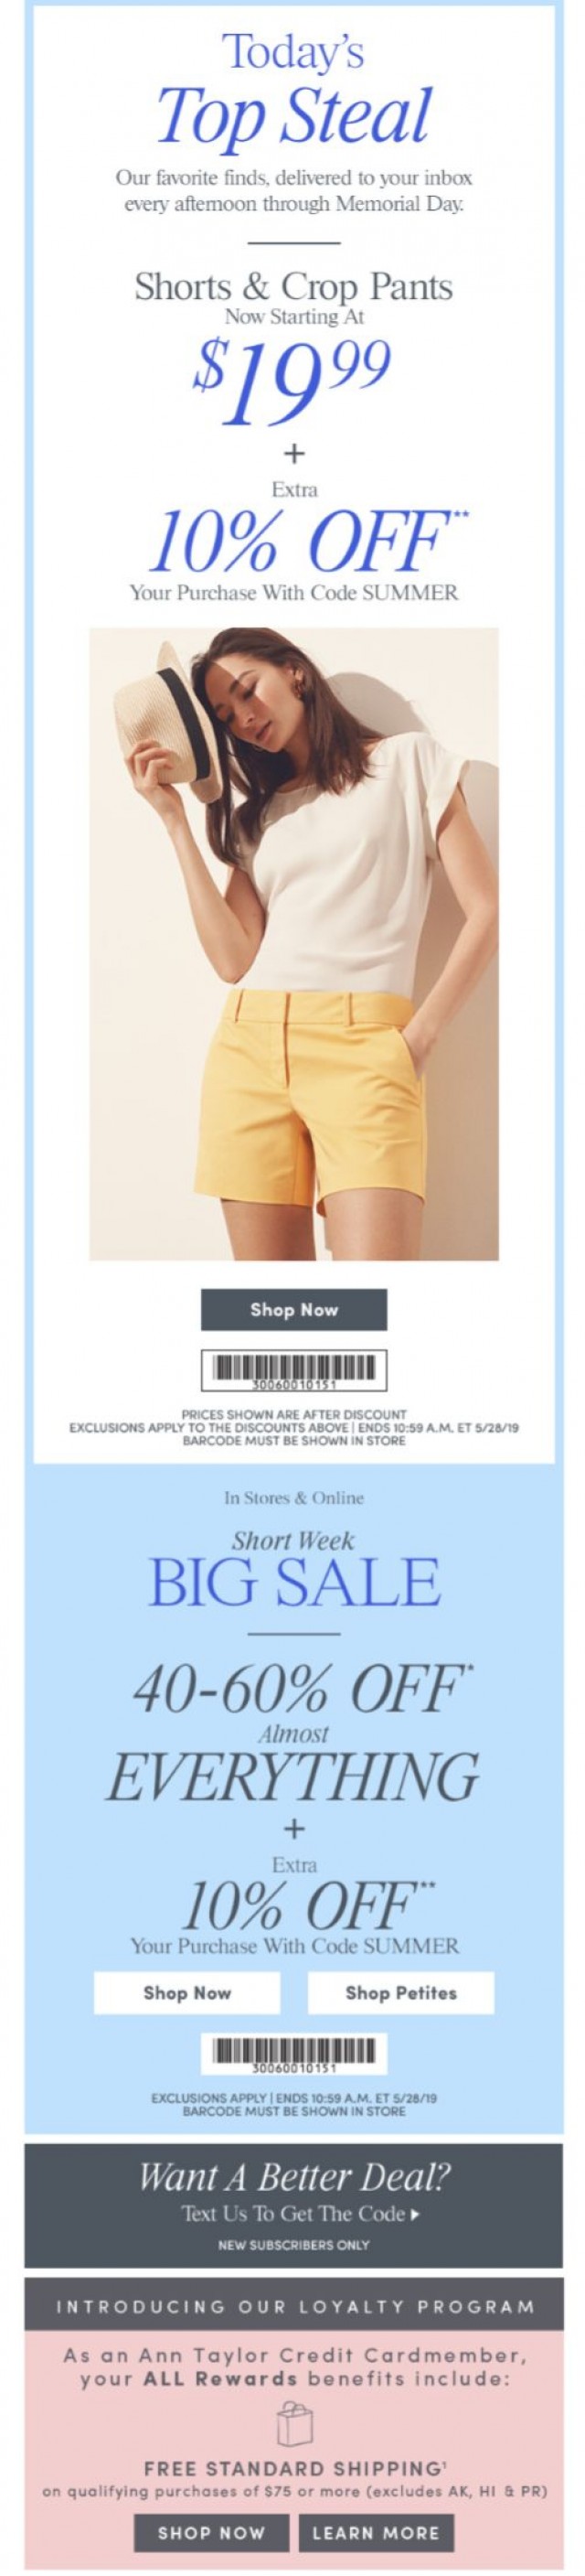 Coupon for: Ann Taylor - Today’s Top Steal: Shorts & Crop Pants Starting At $19.99 